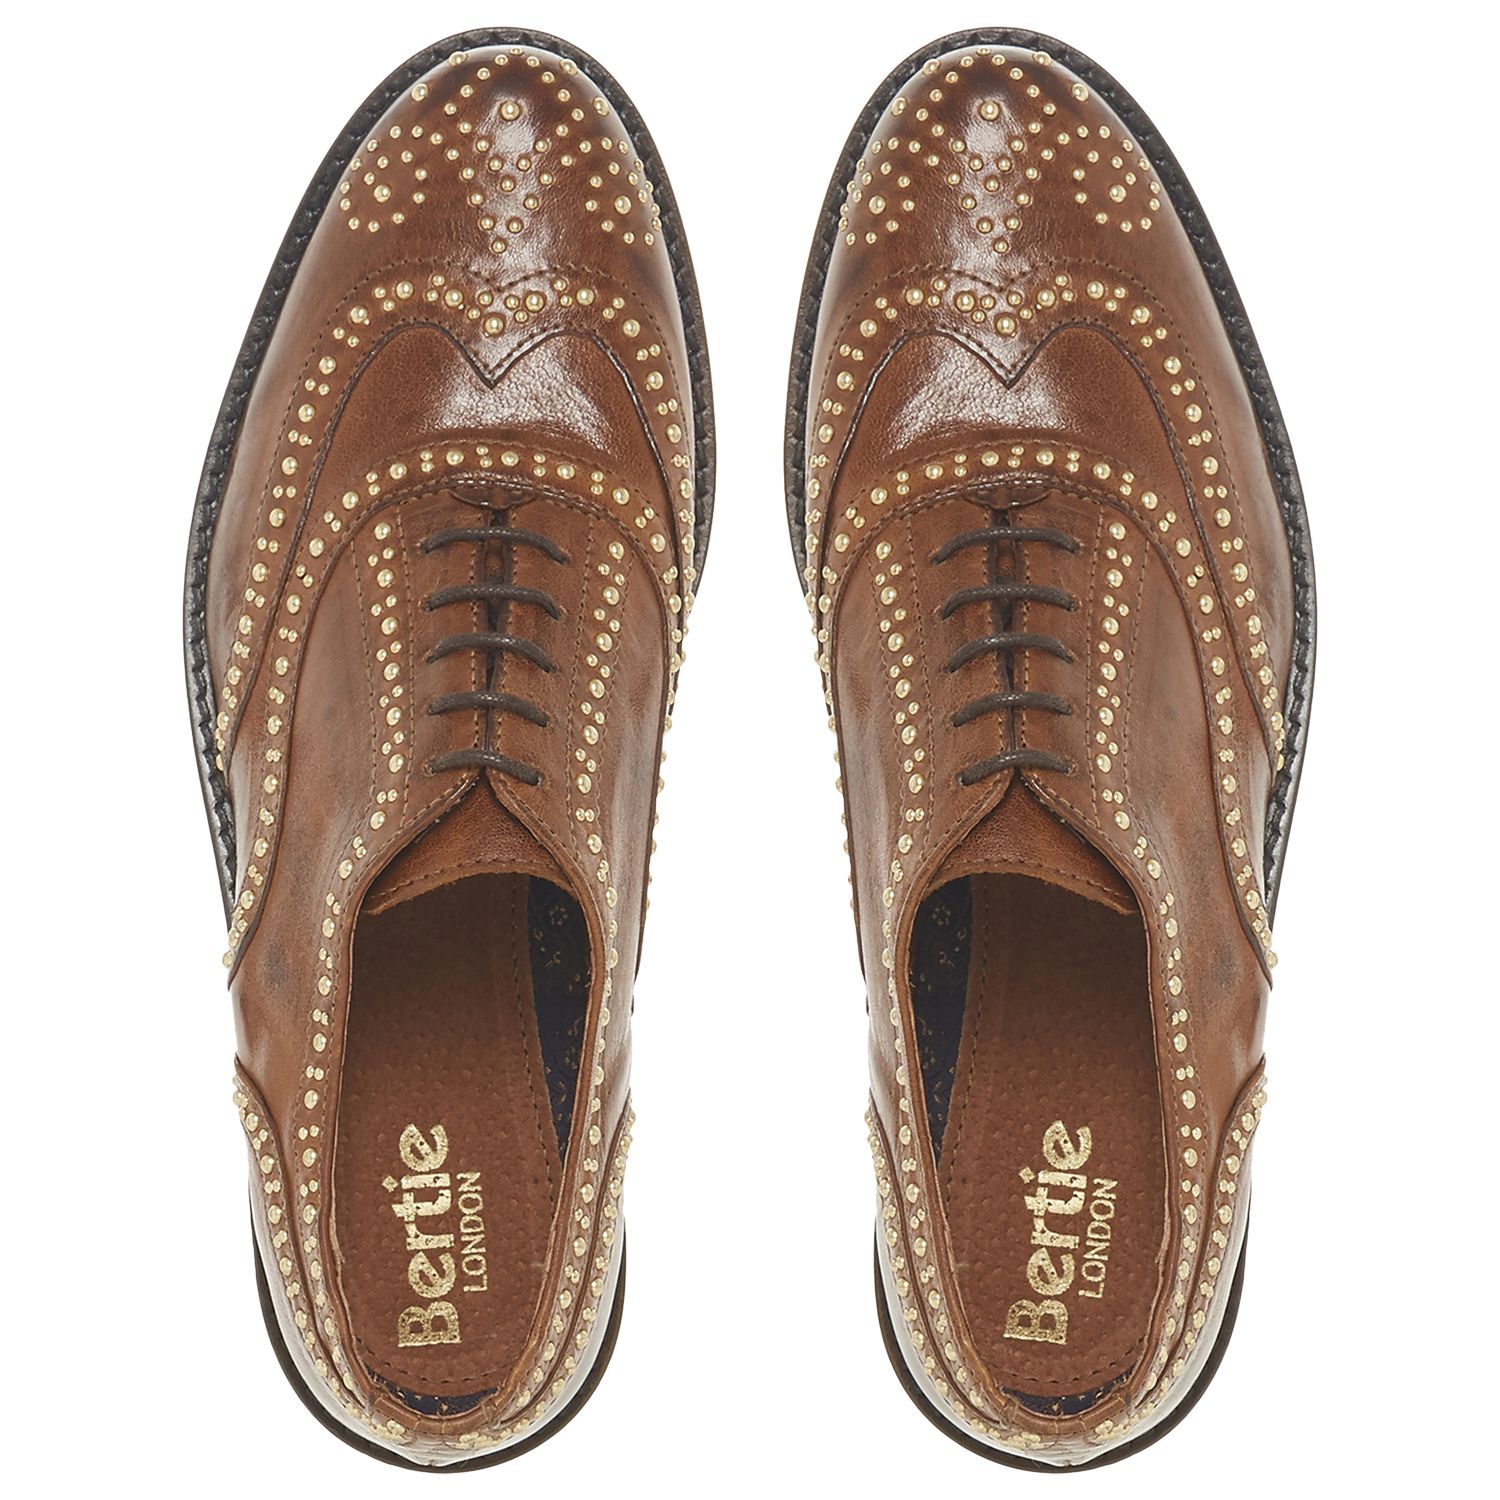 Bertie Farryn Studded Lace Up Brogues, Tan at John Lewis & Partners